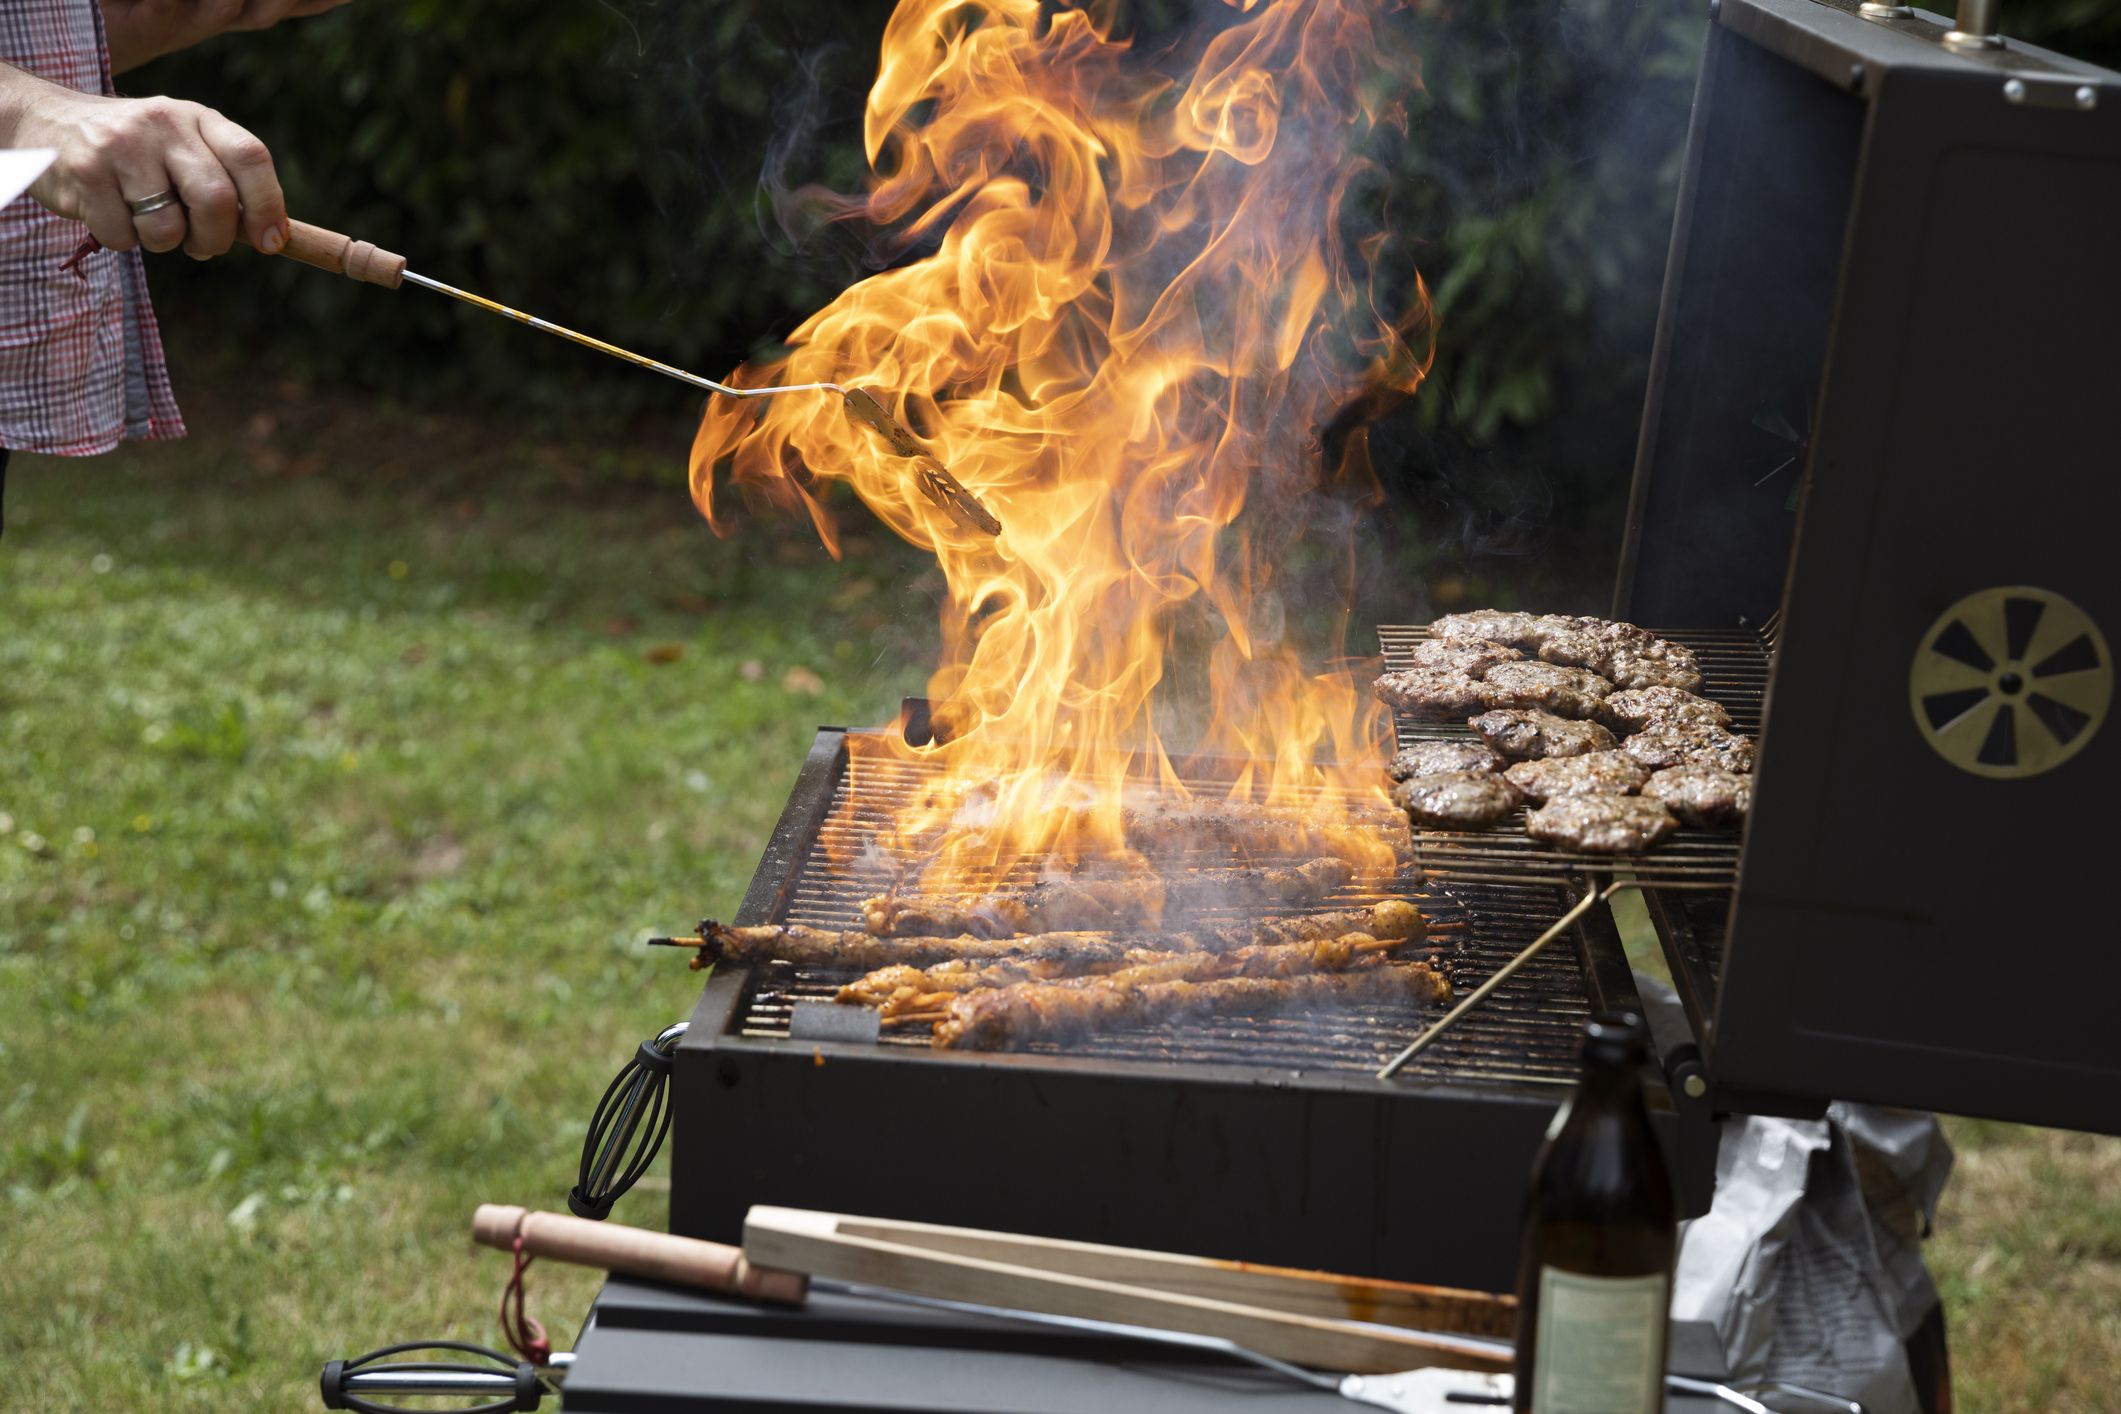 https://hips.hearstapps.com/hmg-prod/images/food-burning-on-a-barbecue-in-a-back-yard-in-royalty-free-image-1687529053.jpg